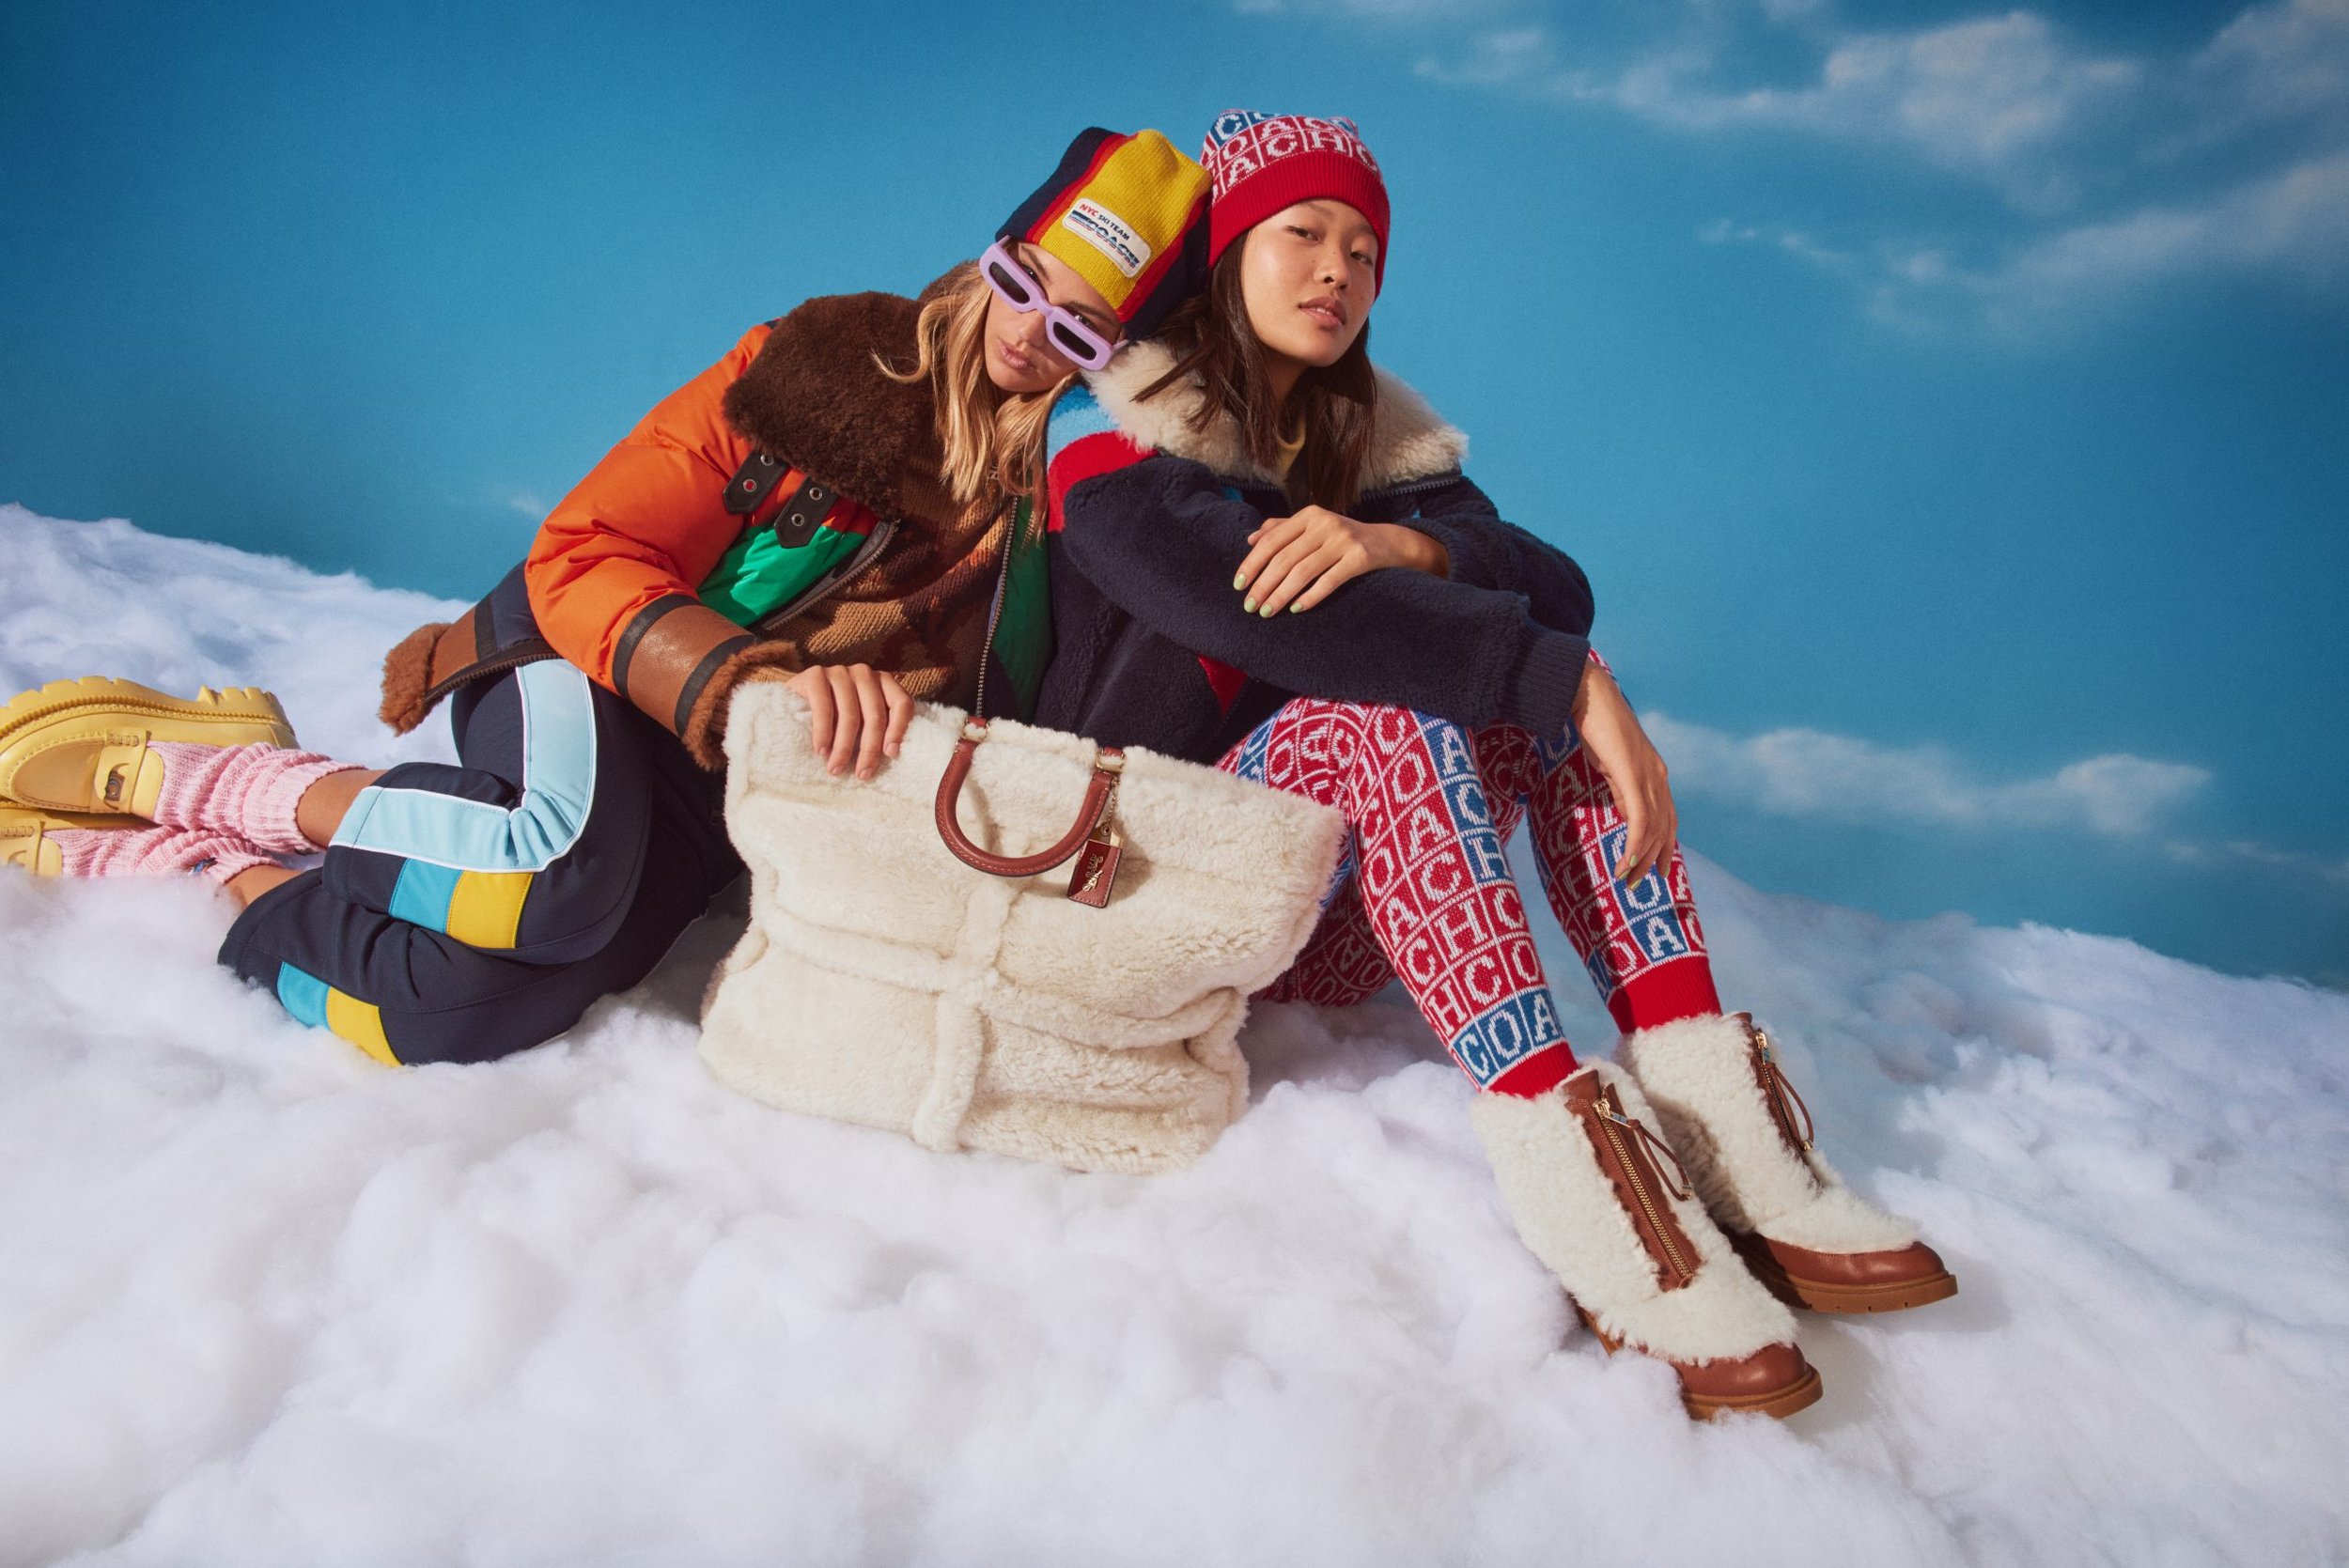 coach-introduces-coach-ski-collection-ad-campaign-the-impression-006-scaled.jpg